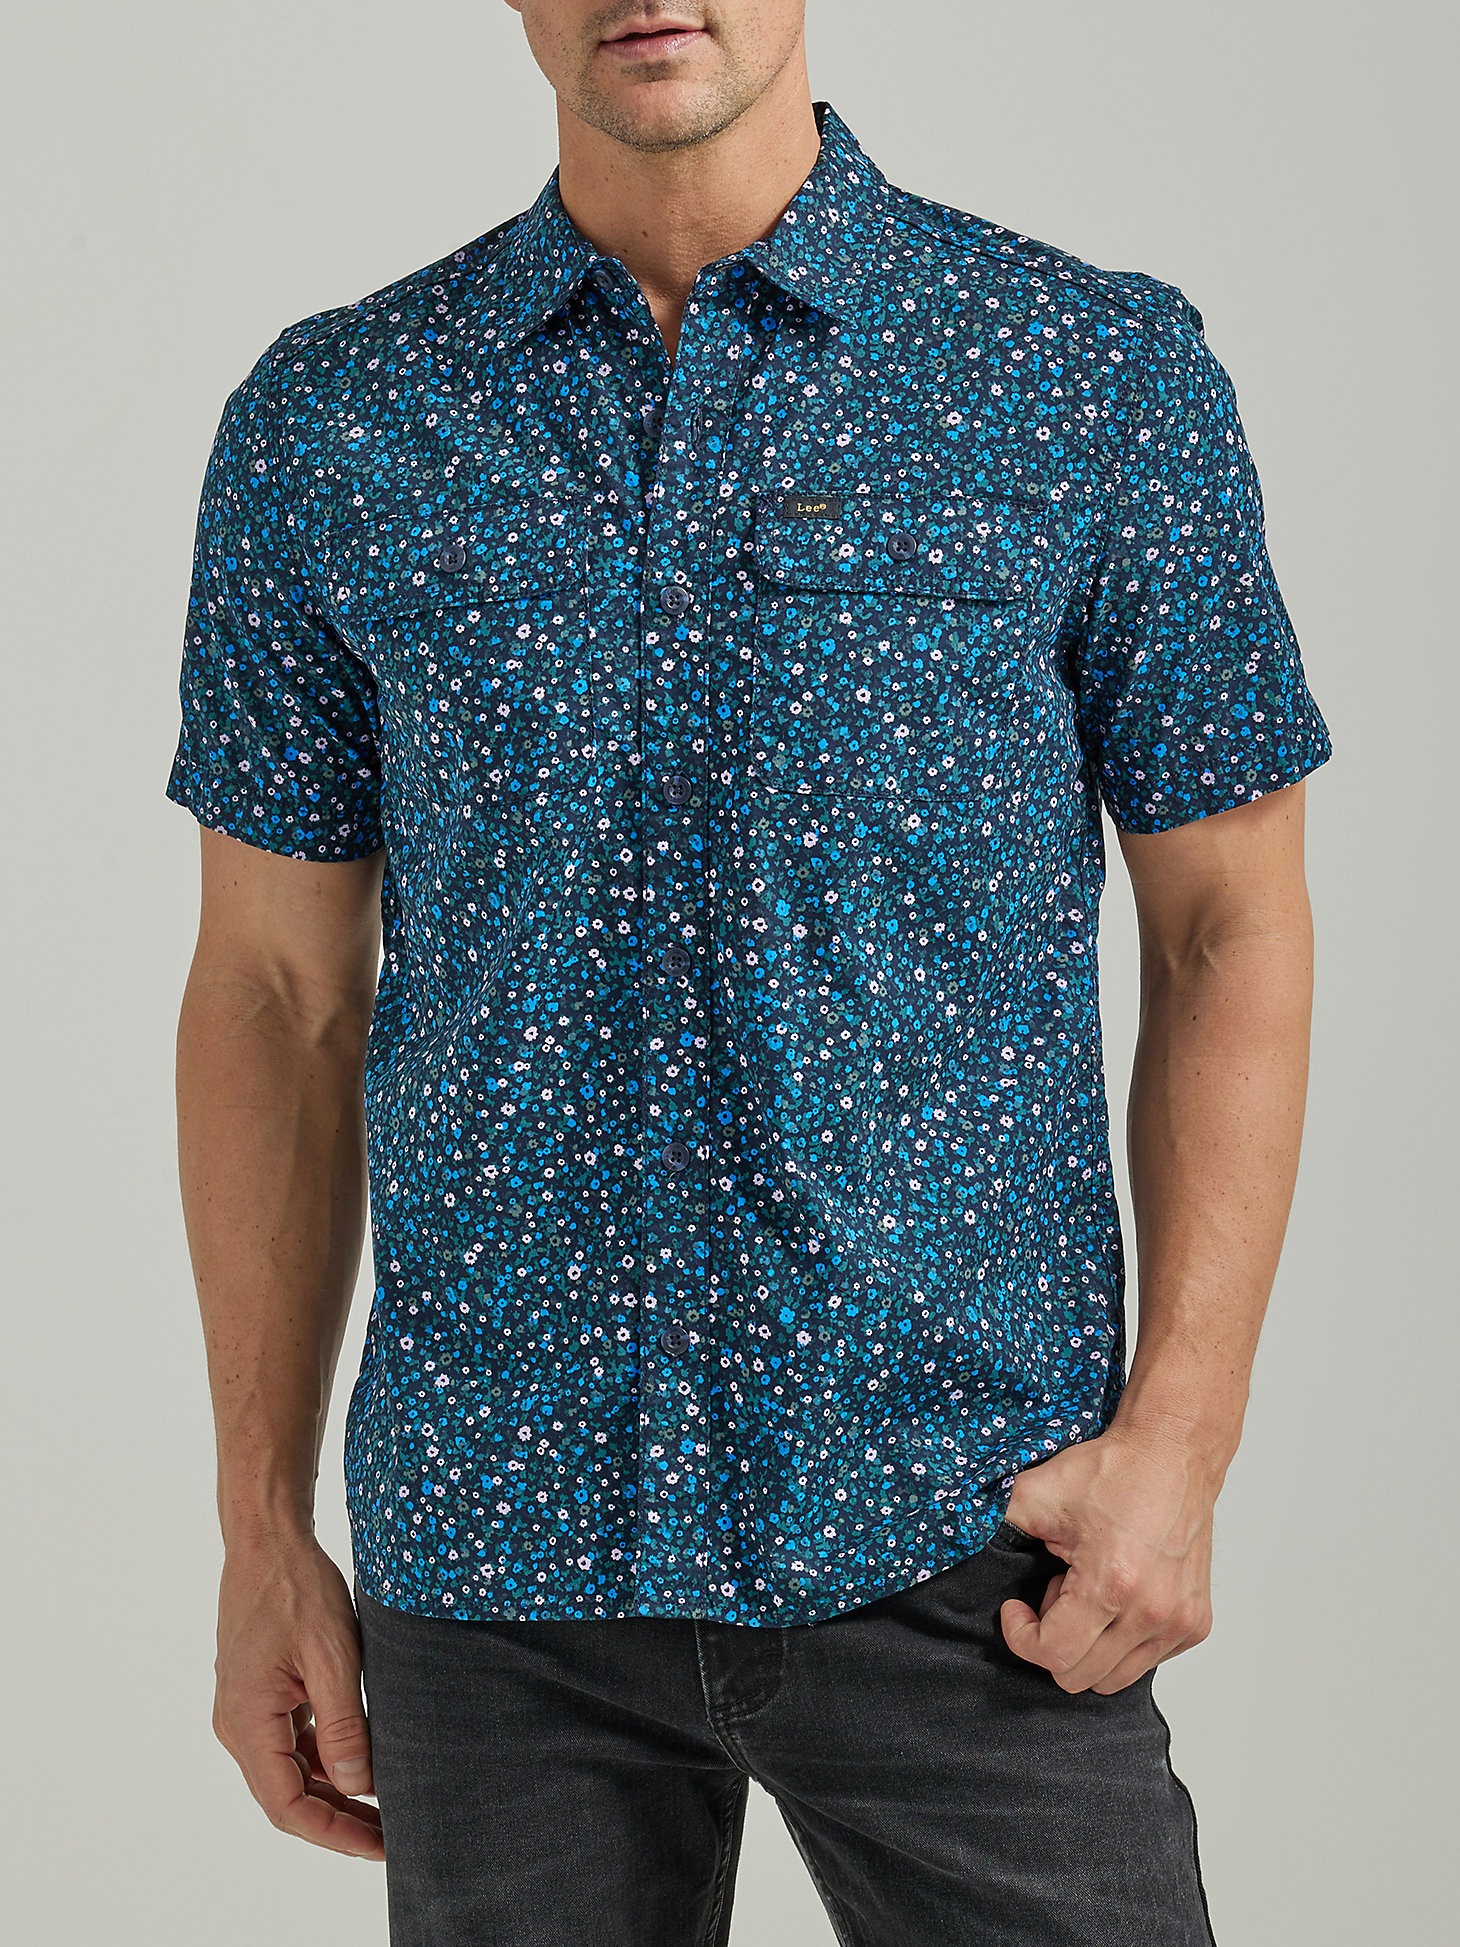 Men's Extreme Motion Short Sleeve Floral Worker Shirt in Rivet Navy Floral Print main view